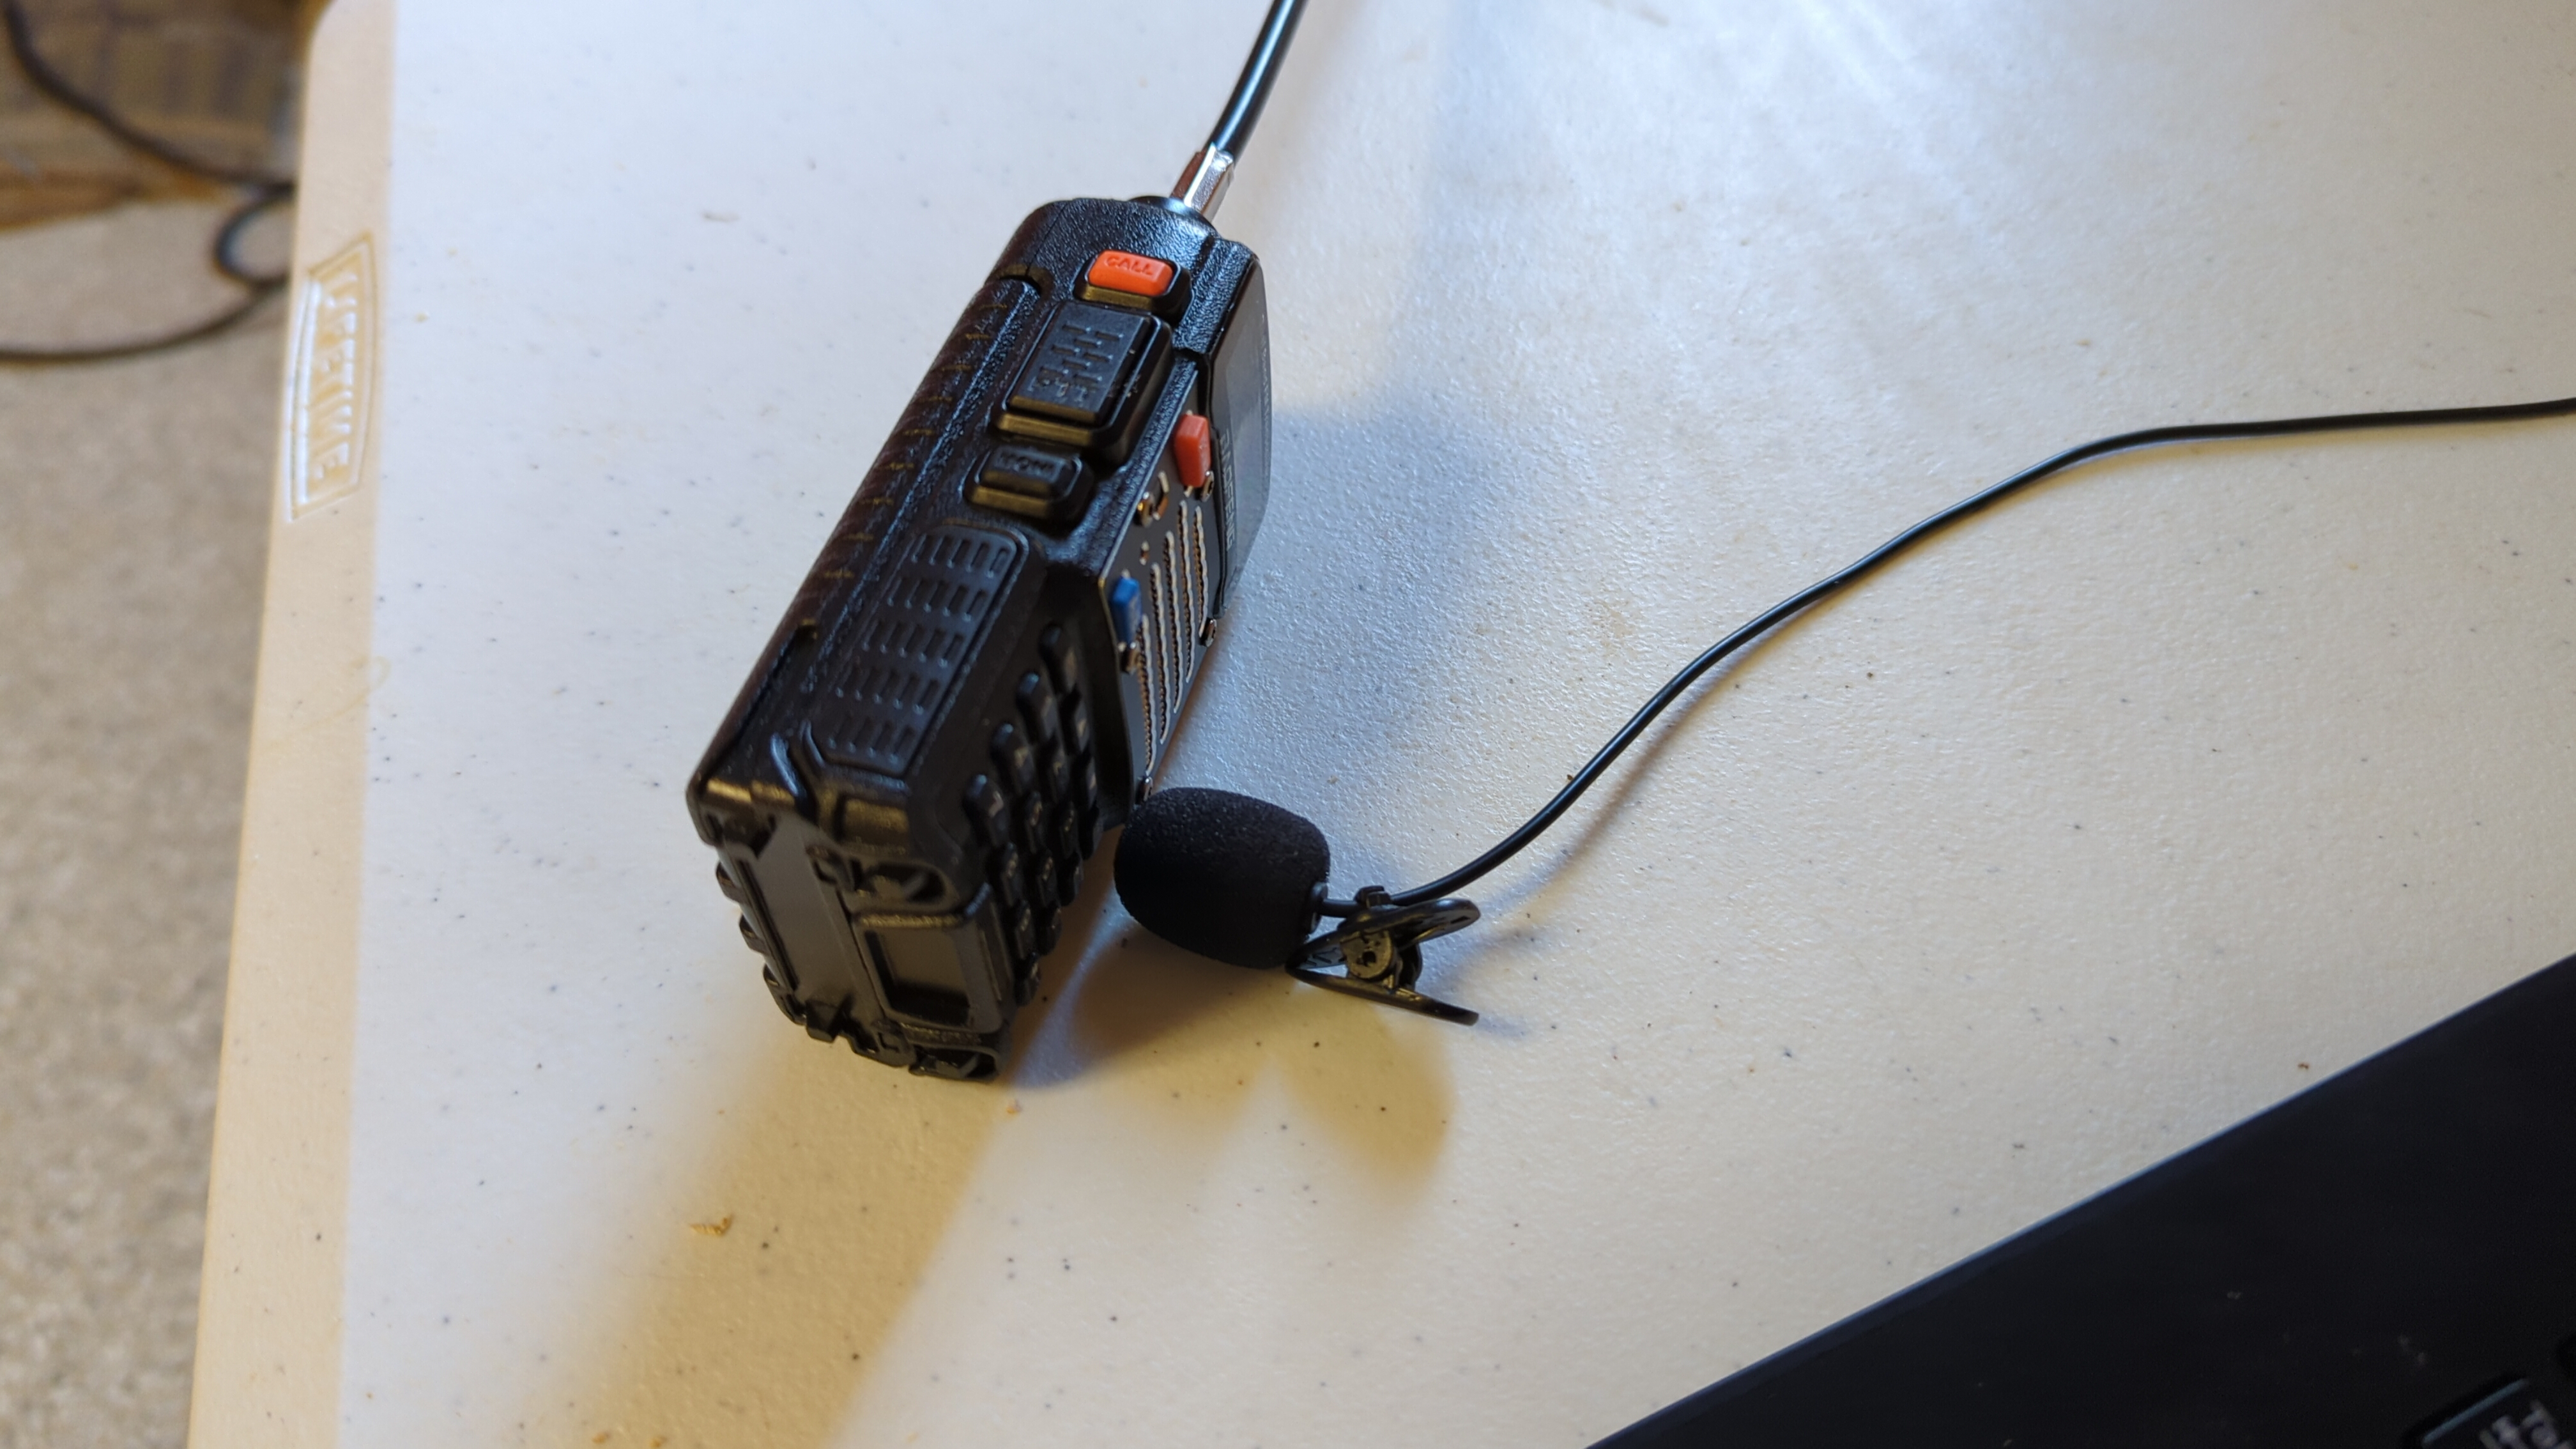 My radio laying on its side on a table with its speaker pointing to a clip-on lav mic